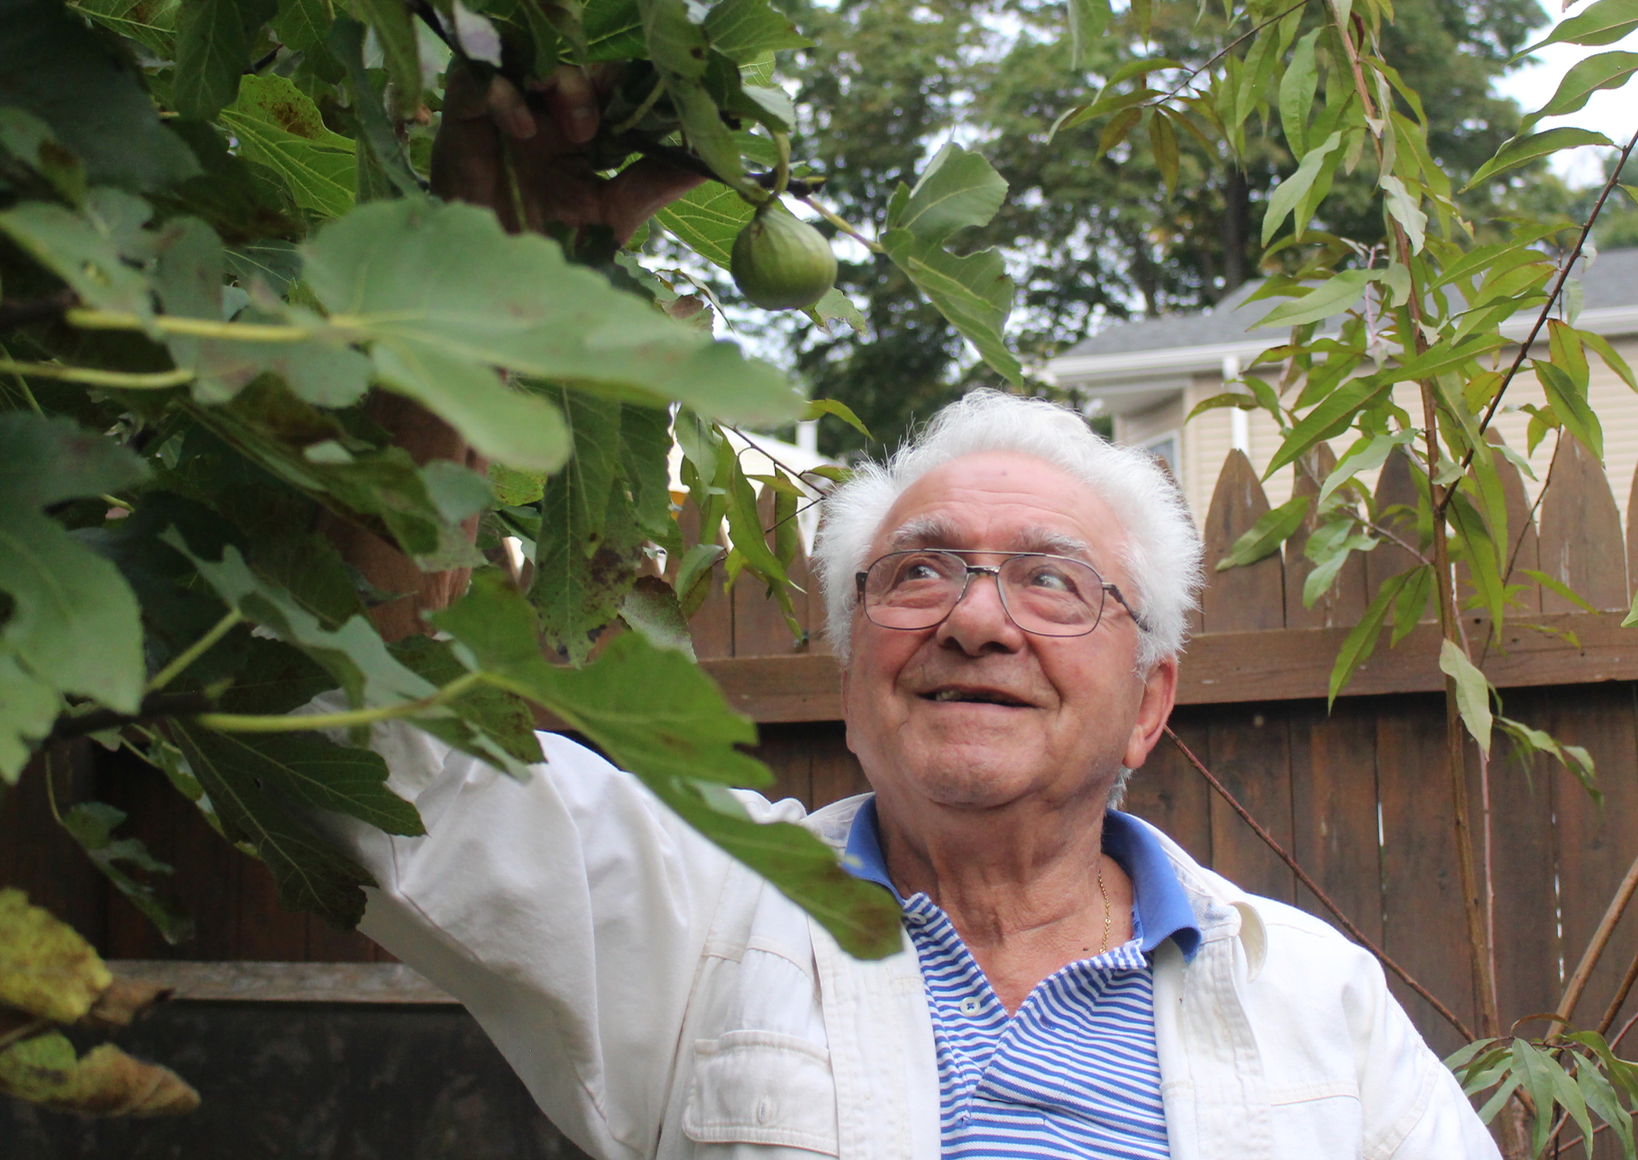 Tony DeVita Sr shows off the last of the figs on one of his fig trees in Pemberwick. Oct 13, 2017 Photo: Leslie Yager